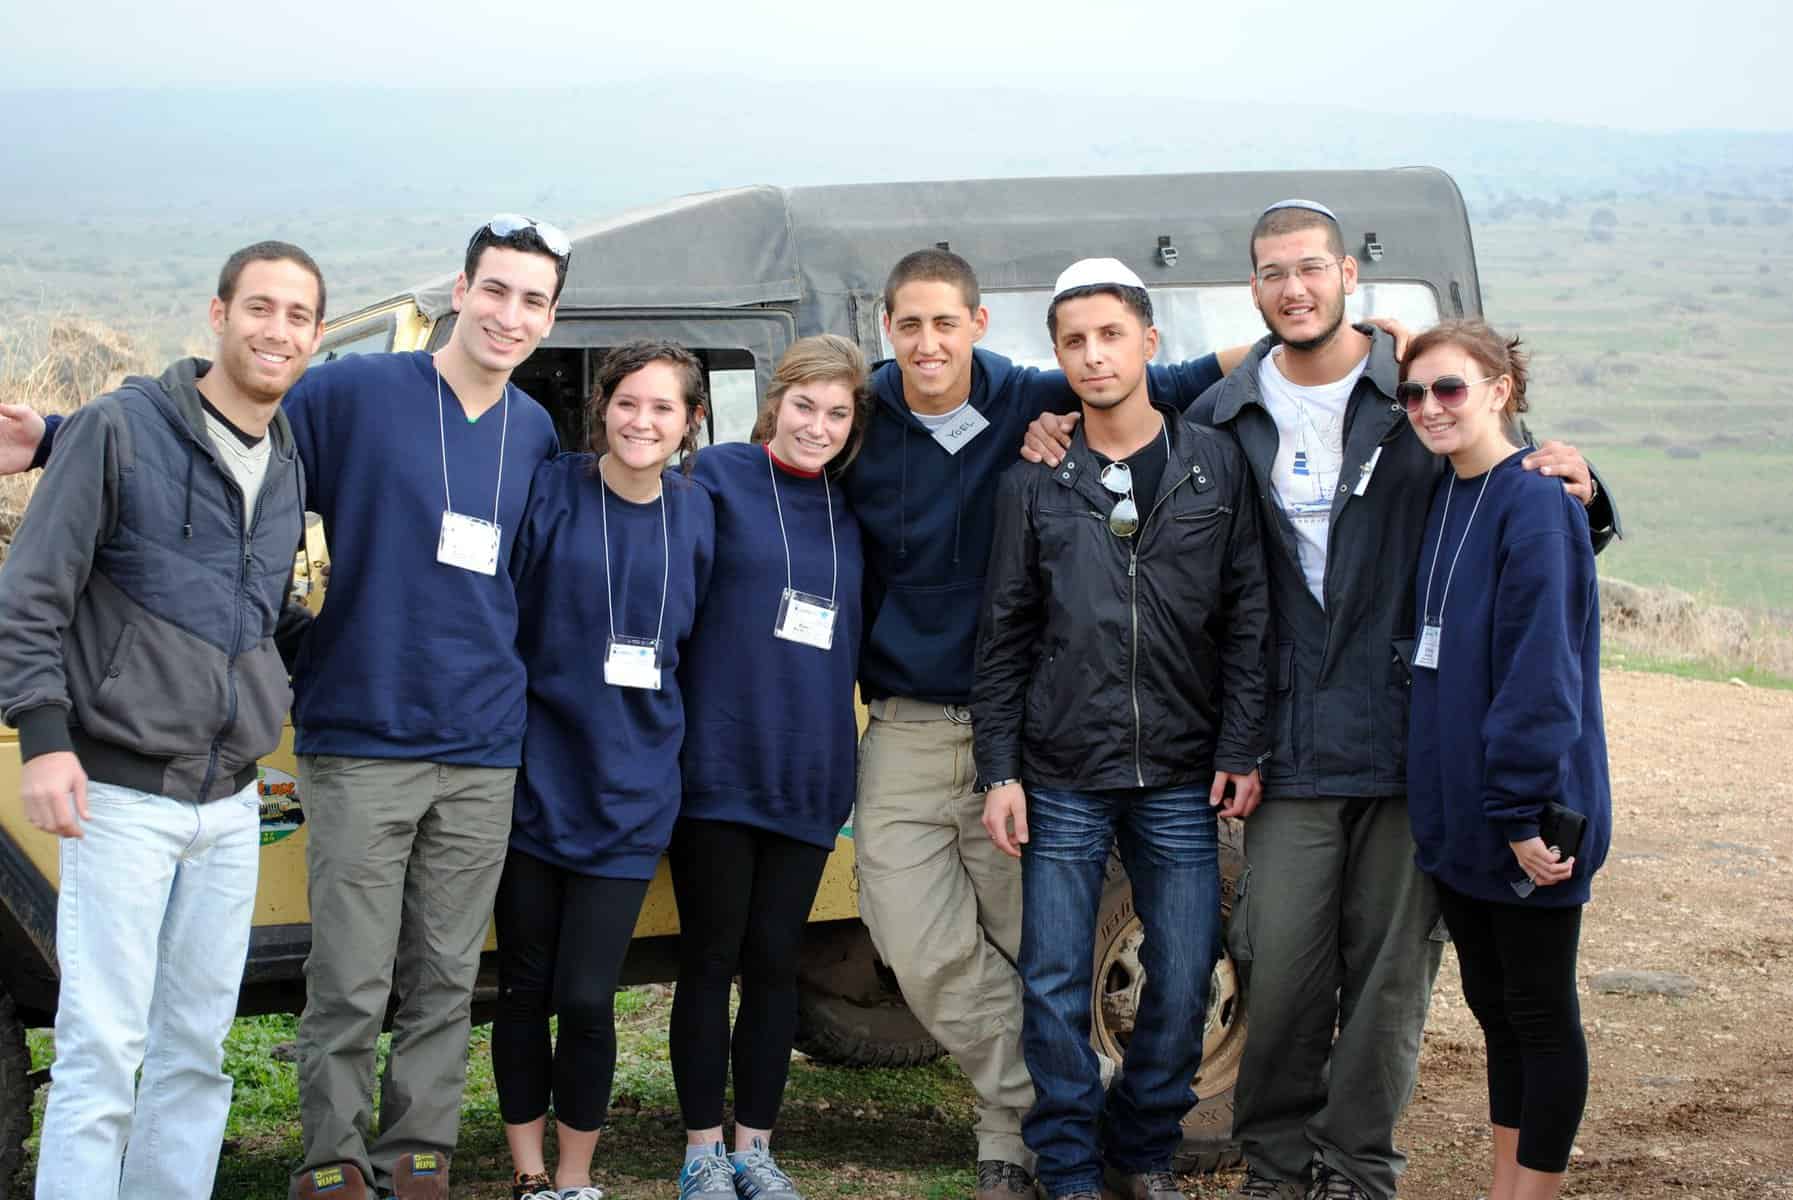 Birthright trips usually include Bonding with Israeli peers who travel with the group